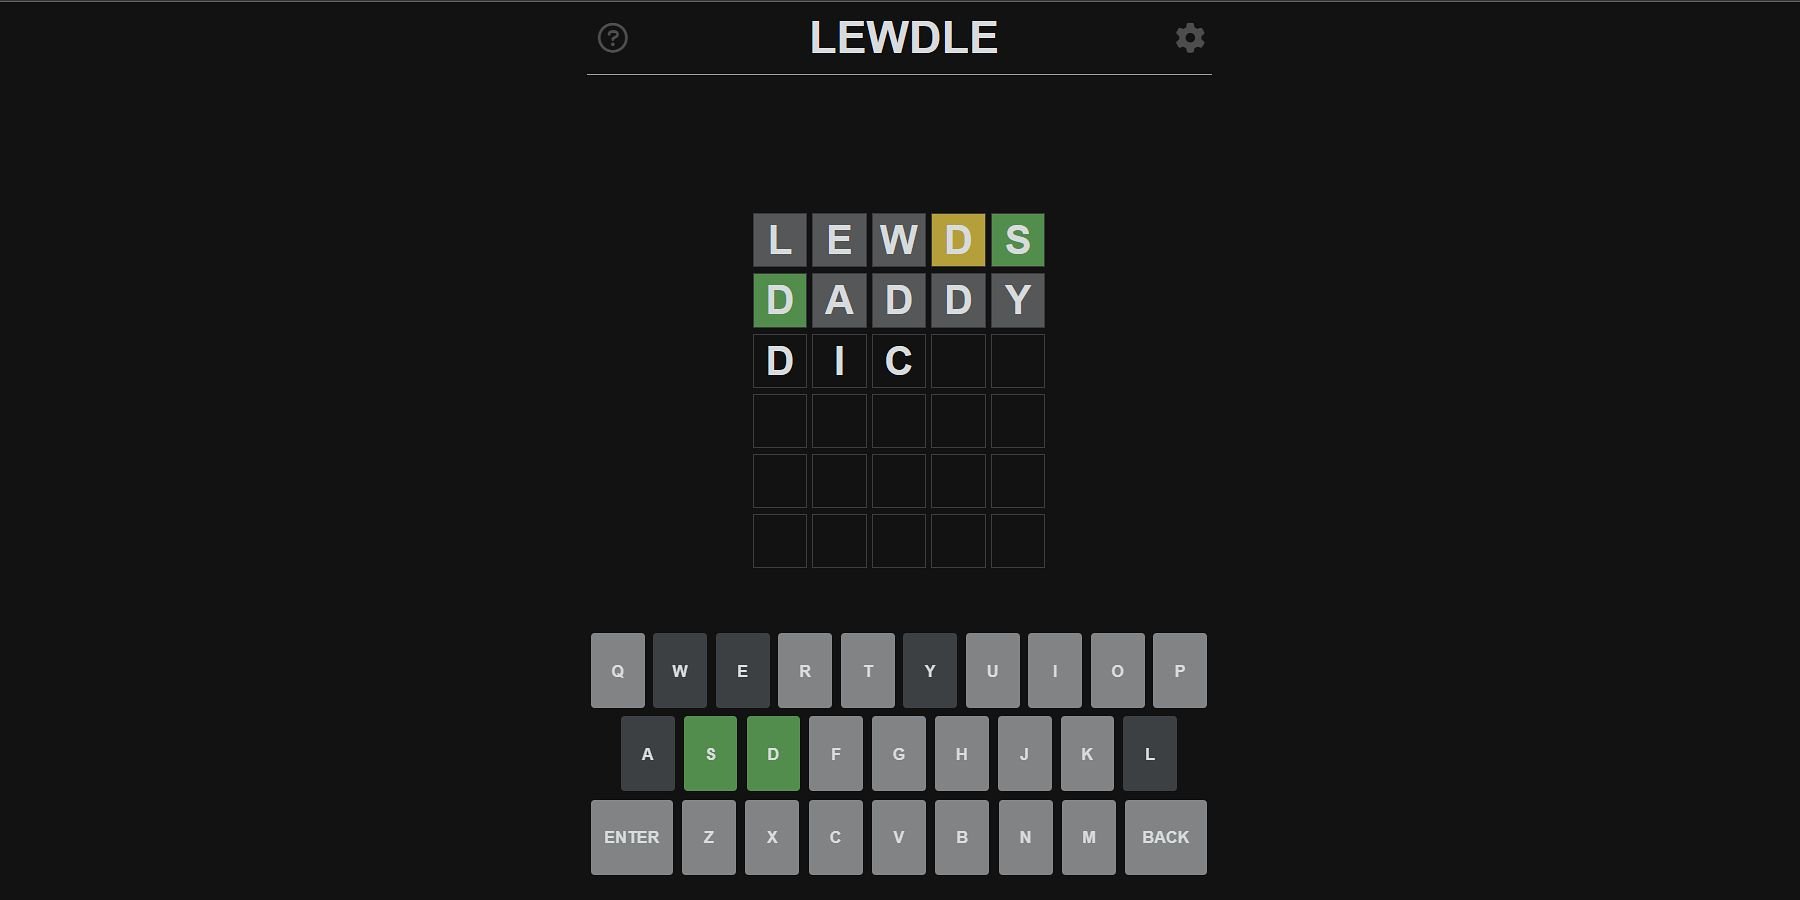 Inappropriate Wordle Clone 'Lewdle' Explained